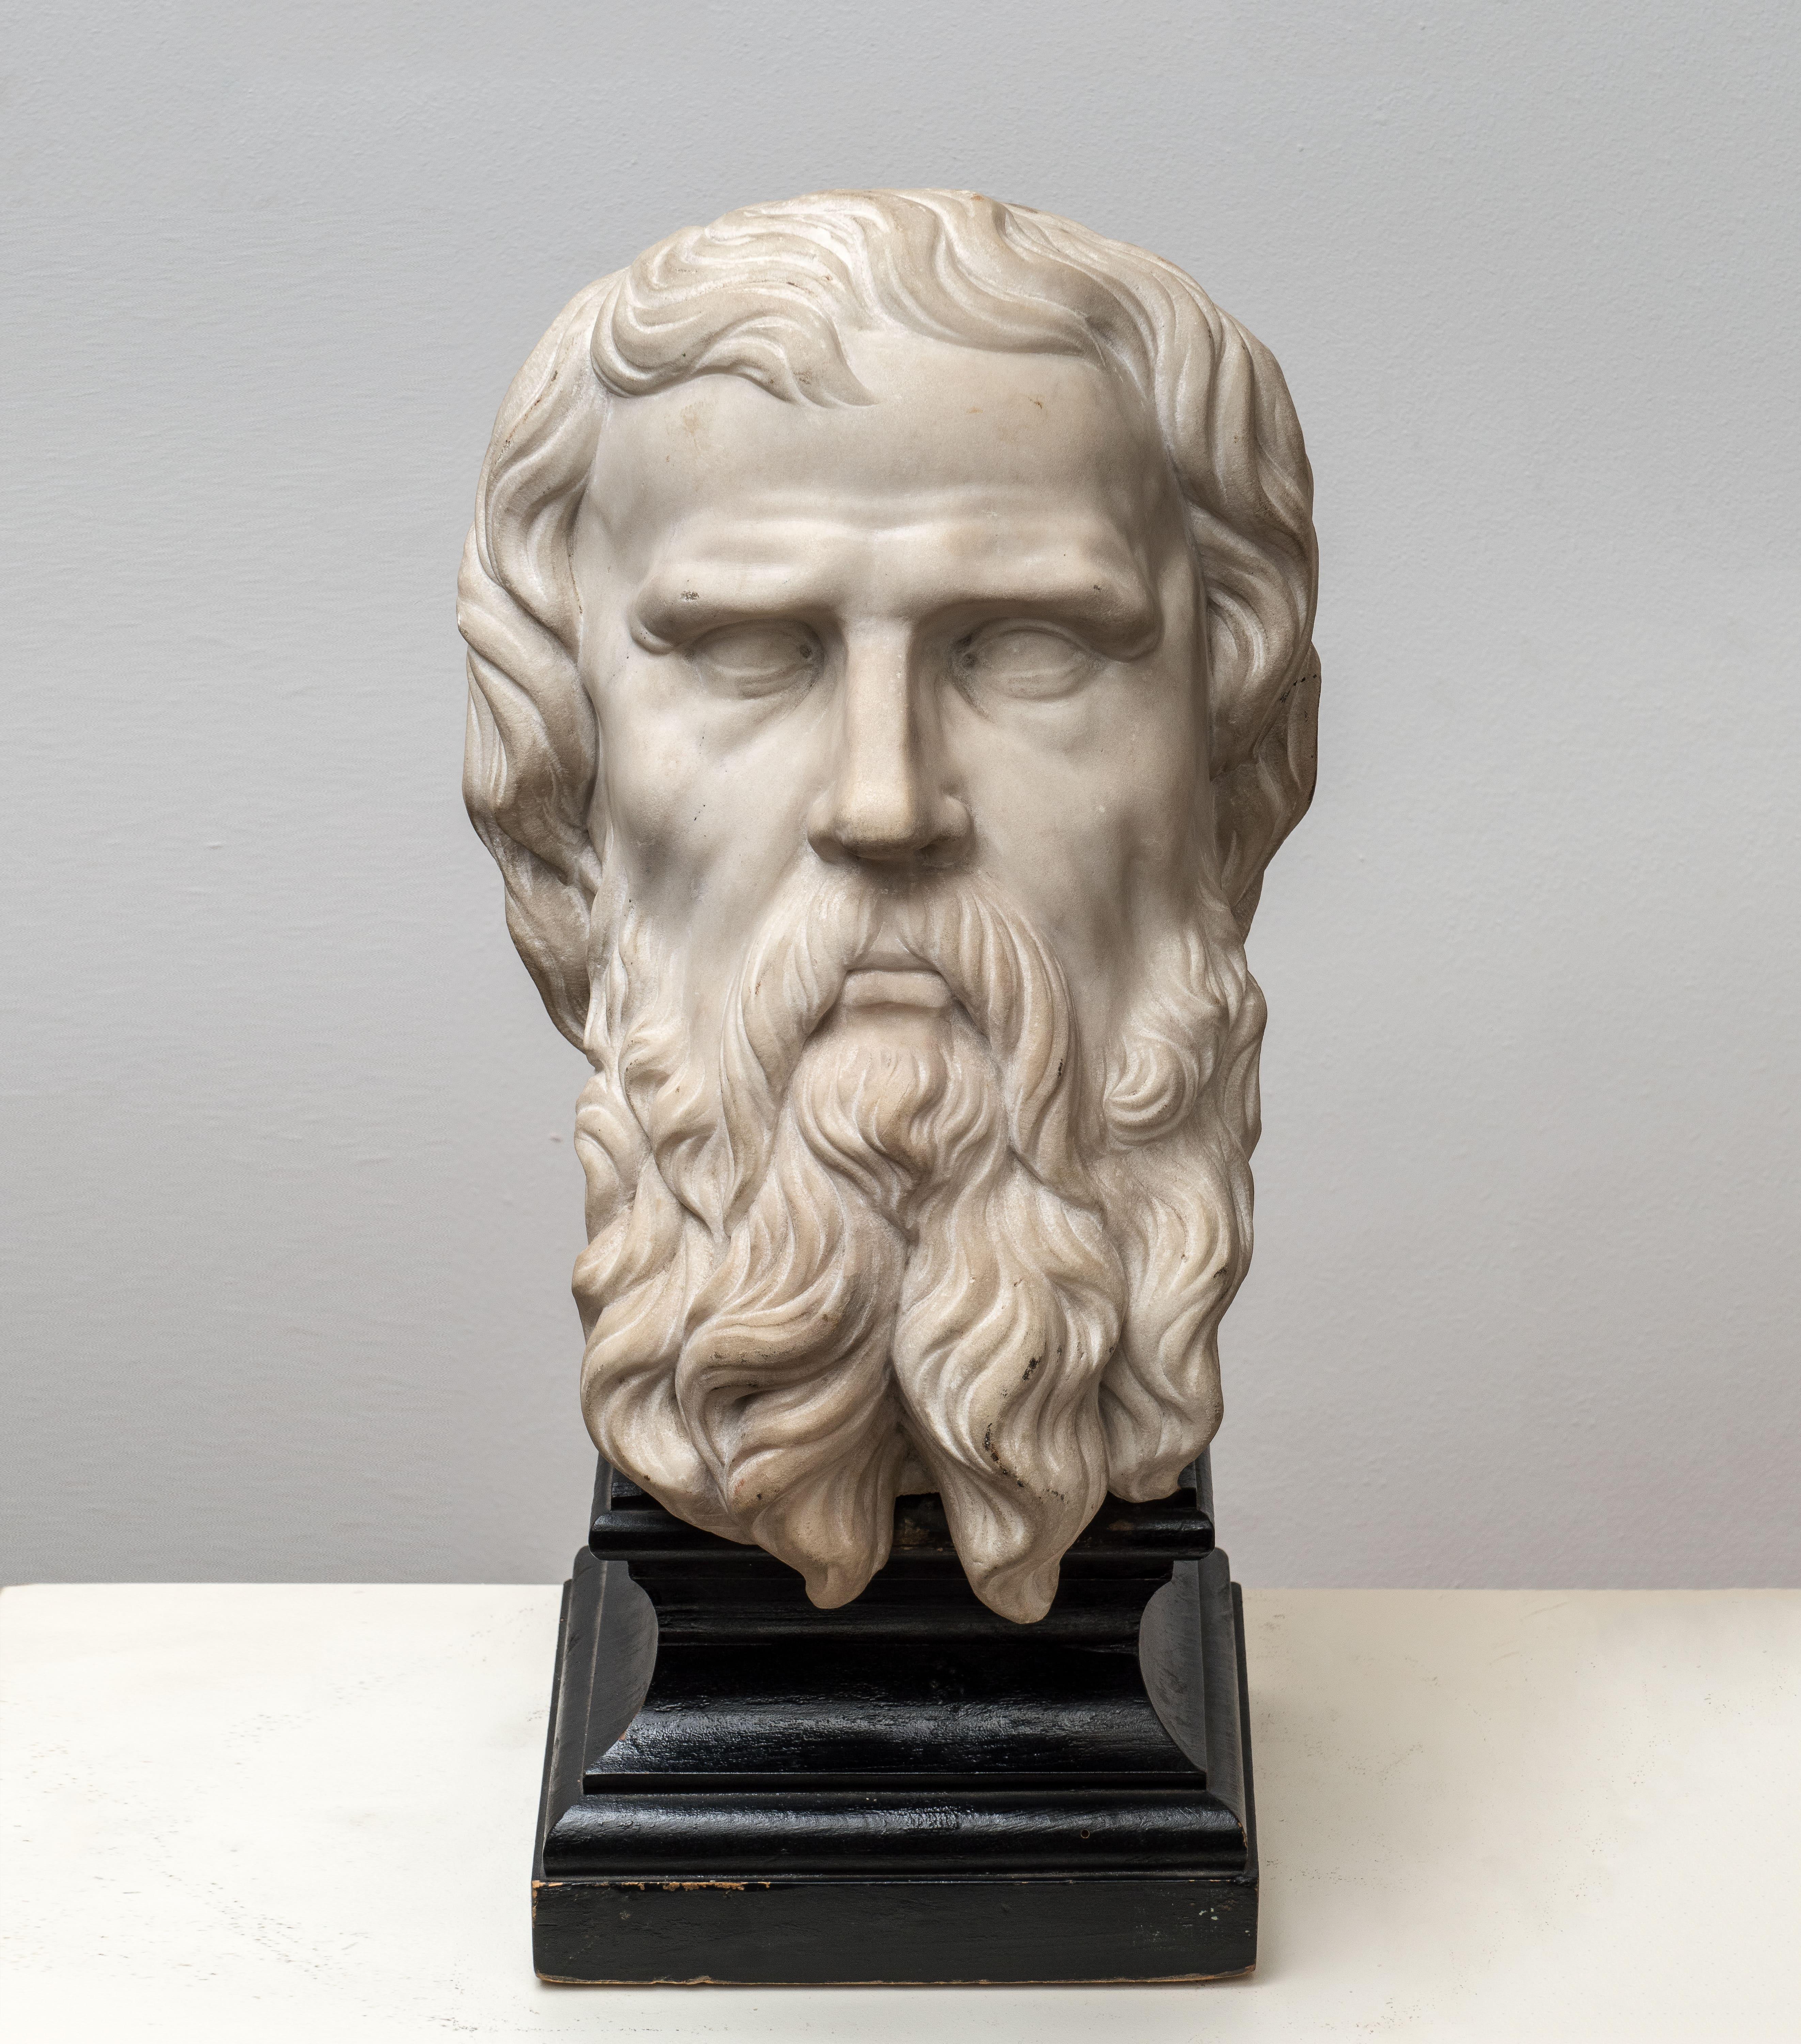 ITALIAN MARBLE HEAD OF A PHILOSOPHER
Italy, Late 17th/early 18th Century
Marble
height 36 cm (14 1/4 in)
height 51 cm (20 in) with base